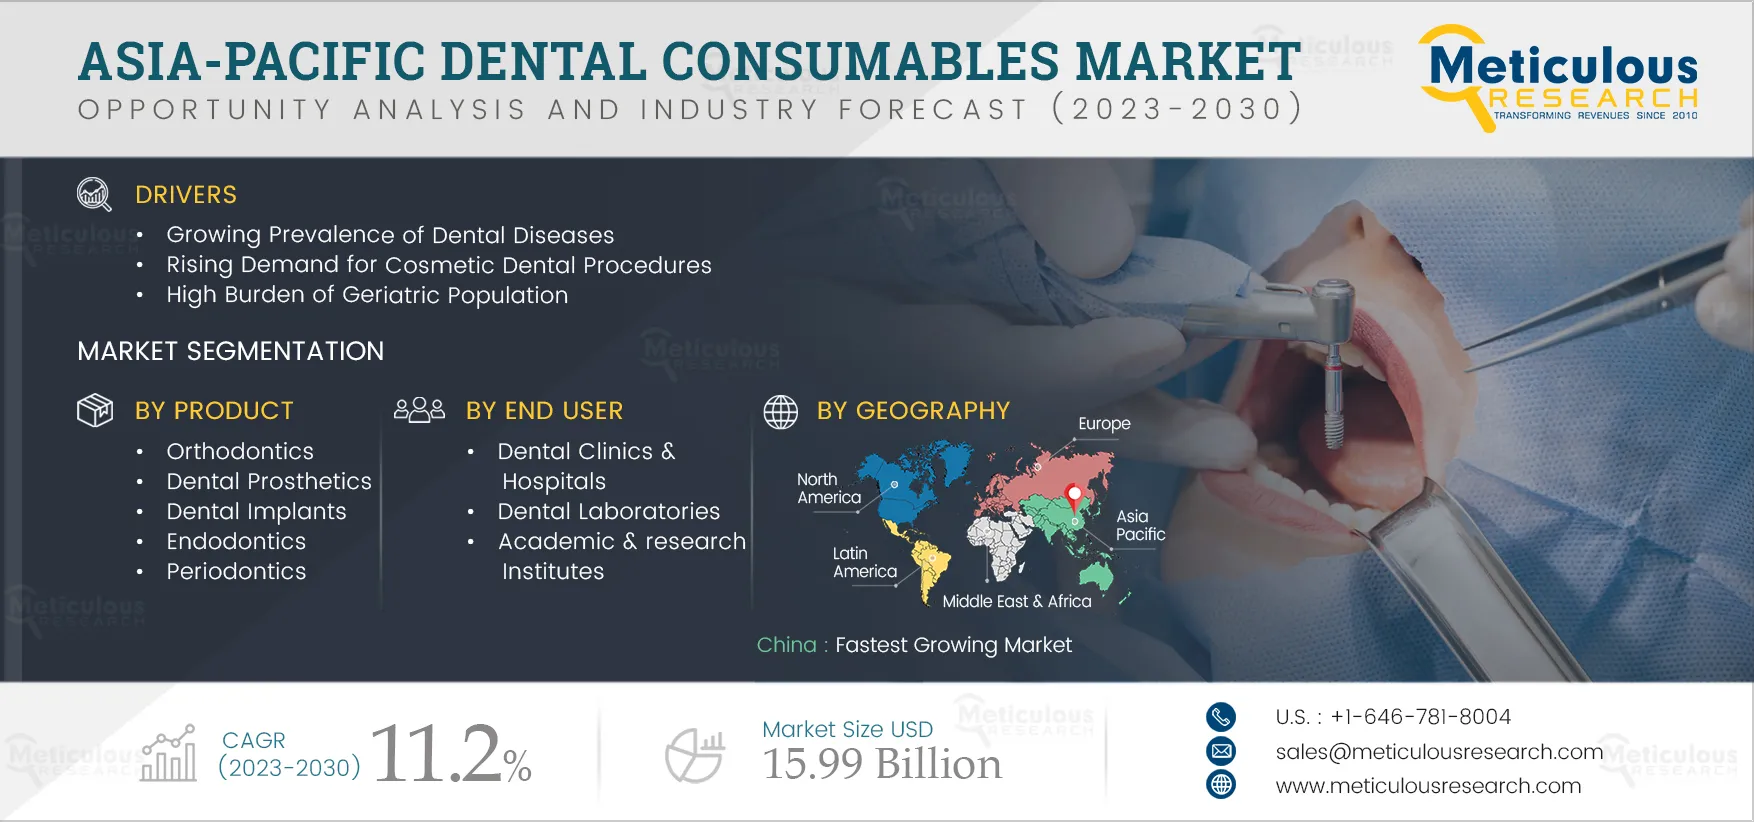 Asia-Pacific Dental Consumables Market 